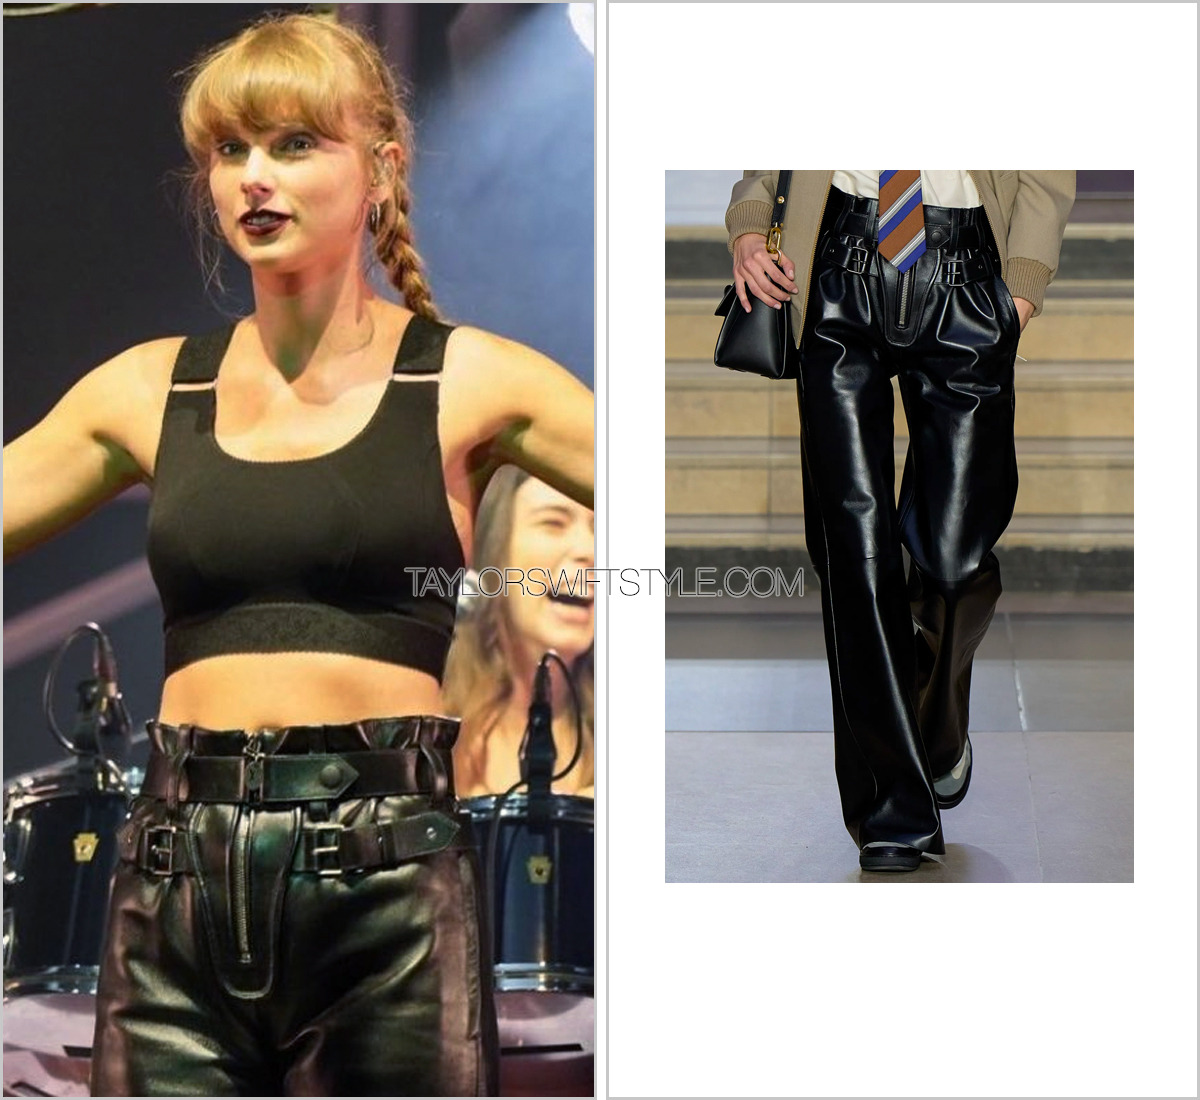 Flawless: TaylorSwiftsLegs  Louis vuitton outfit ideas, Louis vuitton  dress, Taylor swift pictures